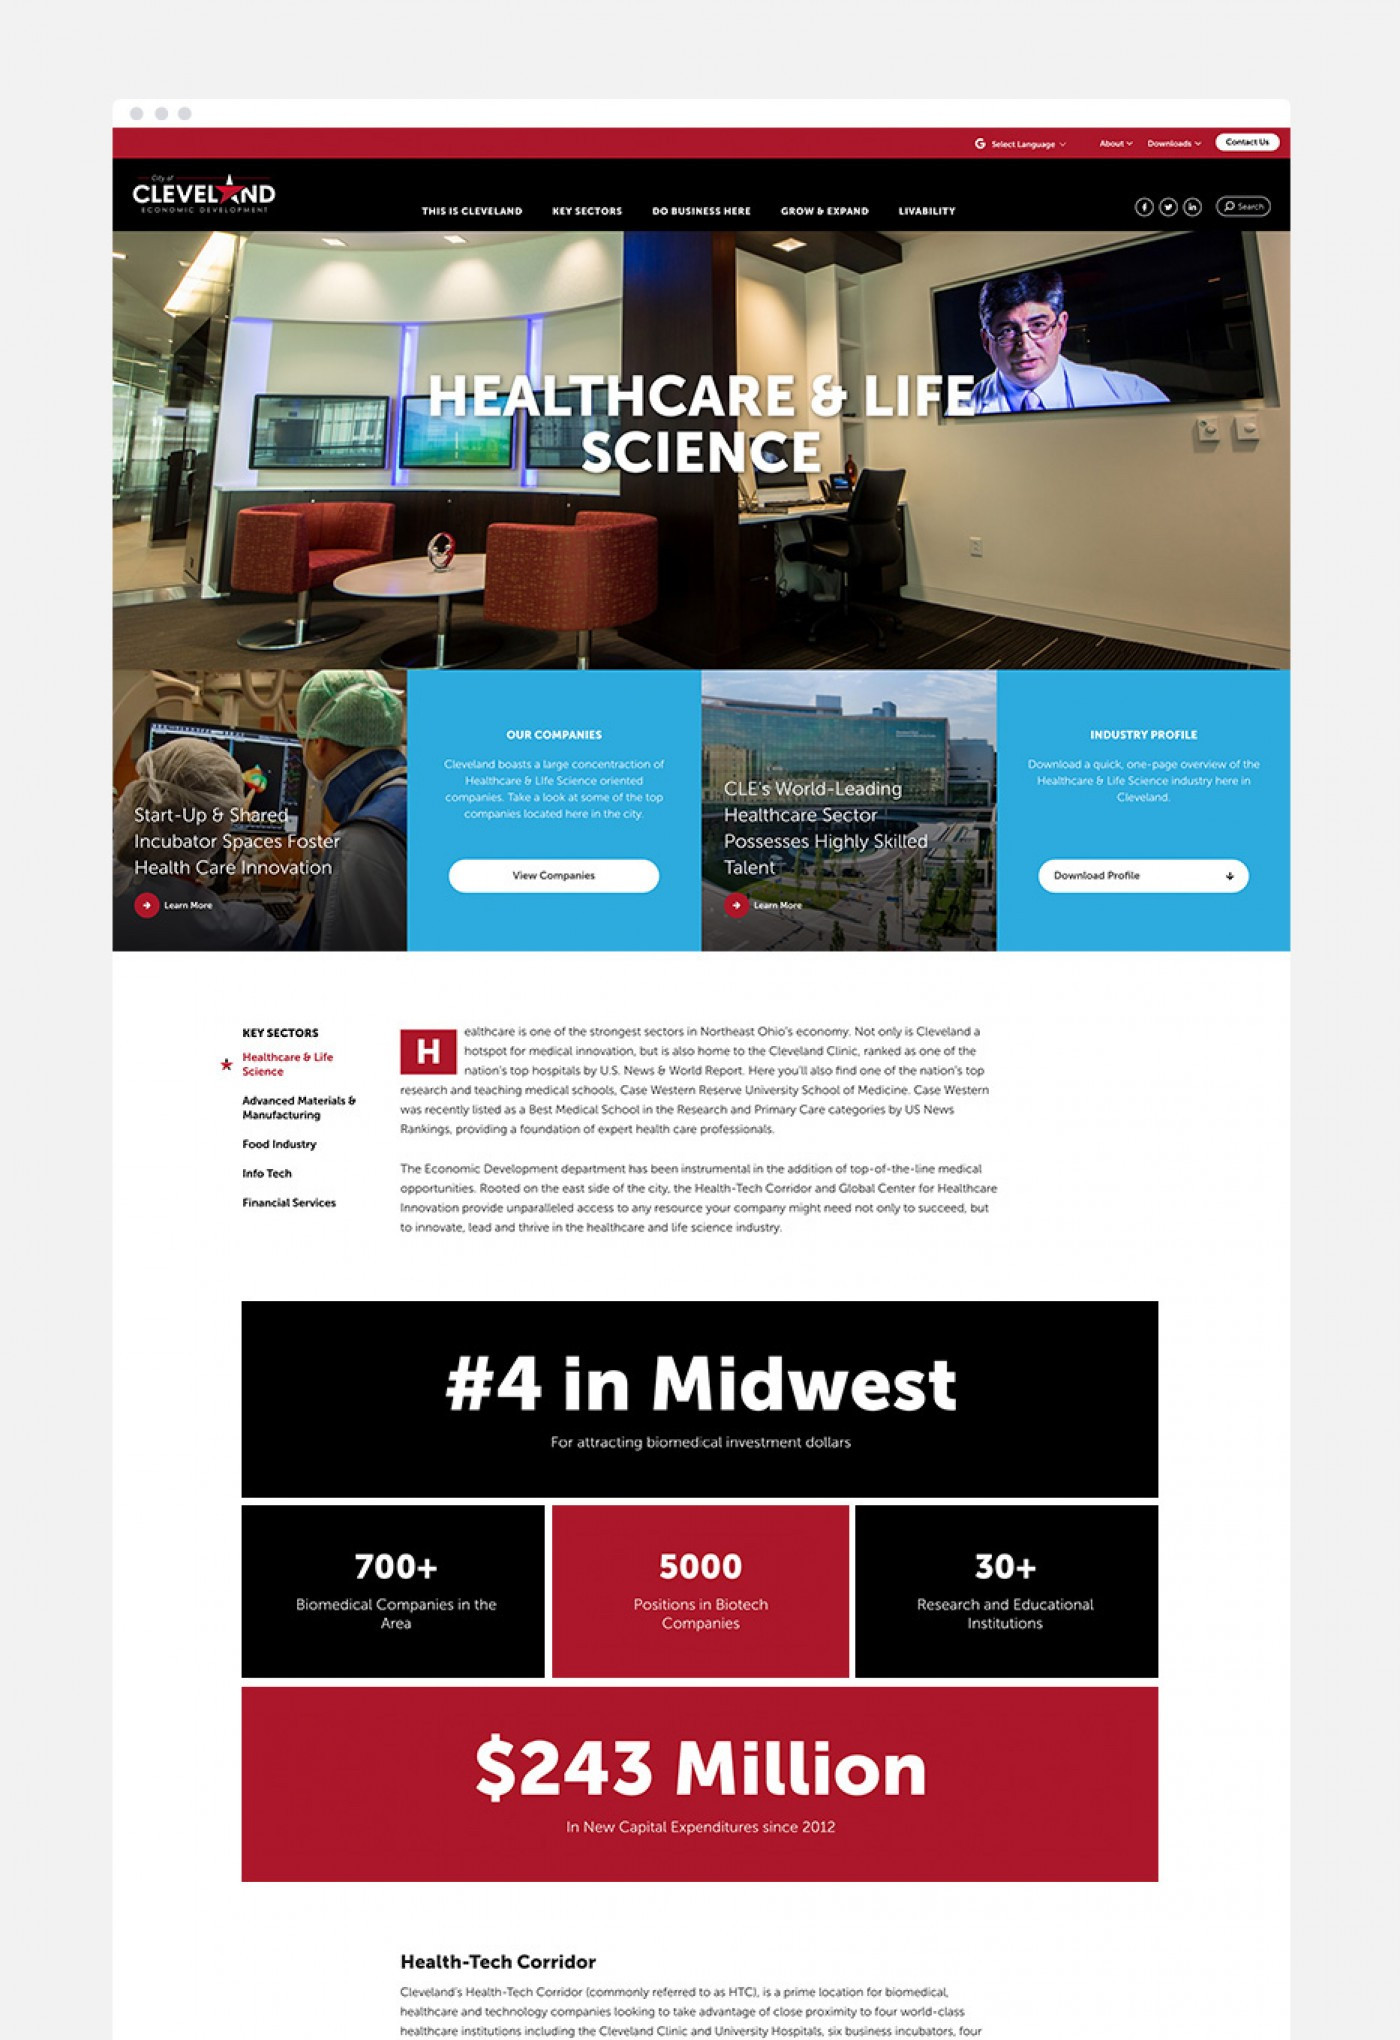 Screenshot of the Healthcare and life science page on Cleveland's site